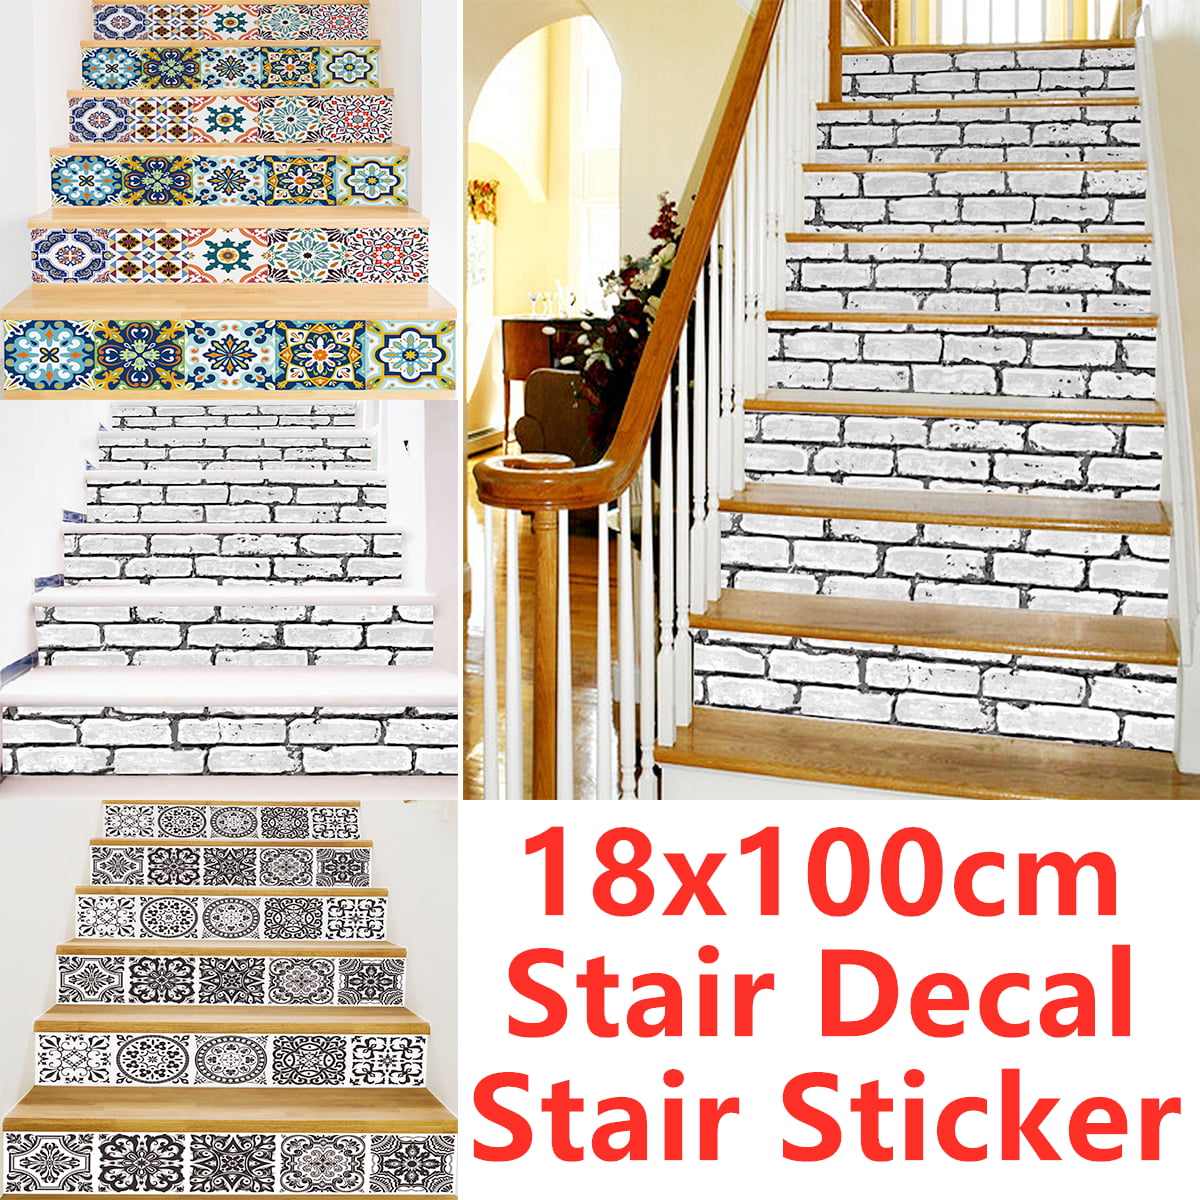 Stellino Terracotta Pack of 6 Stair Riser Stickers Removable Stair Riser Tile Decals Peel & Stick Stair Riser Deco Strips 48 long